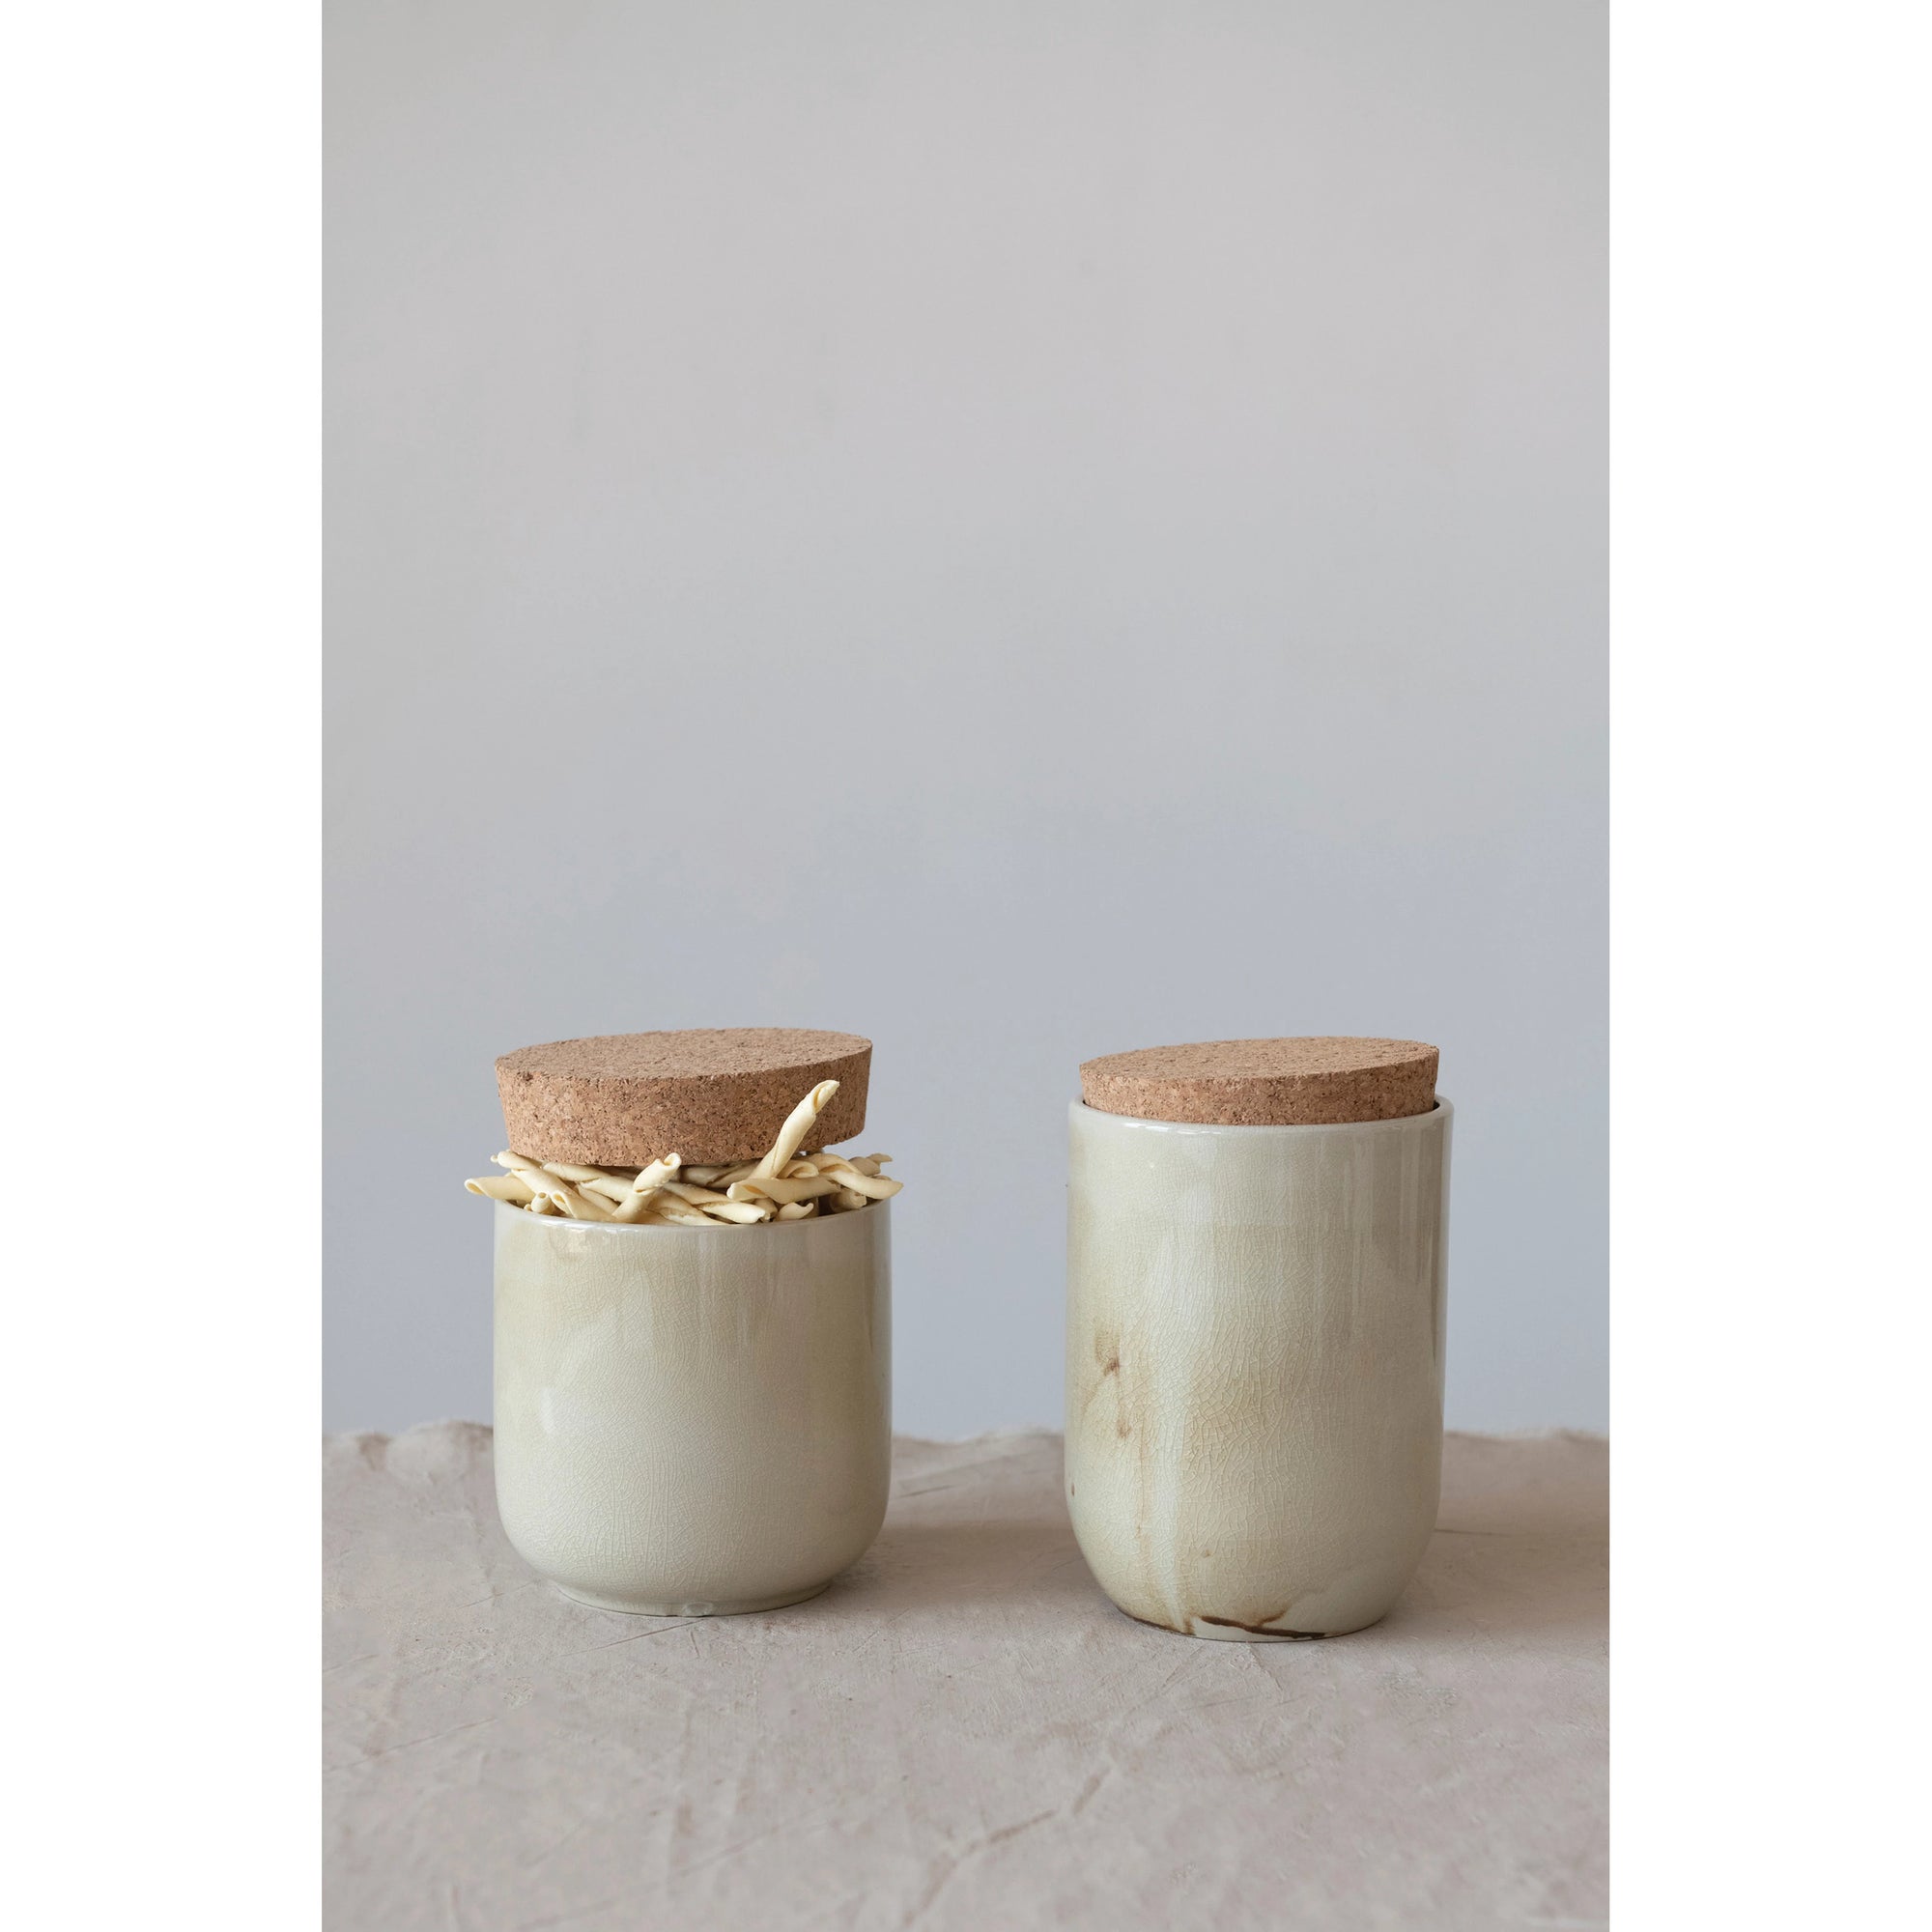 Set of two taupe swirled marble stoneware vases with cork lid. One is filled with dried pasta. 